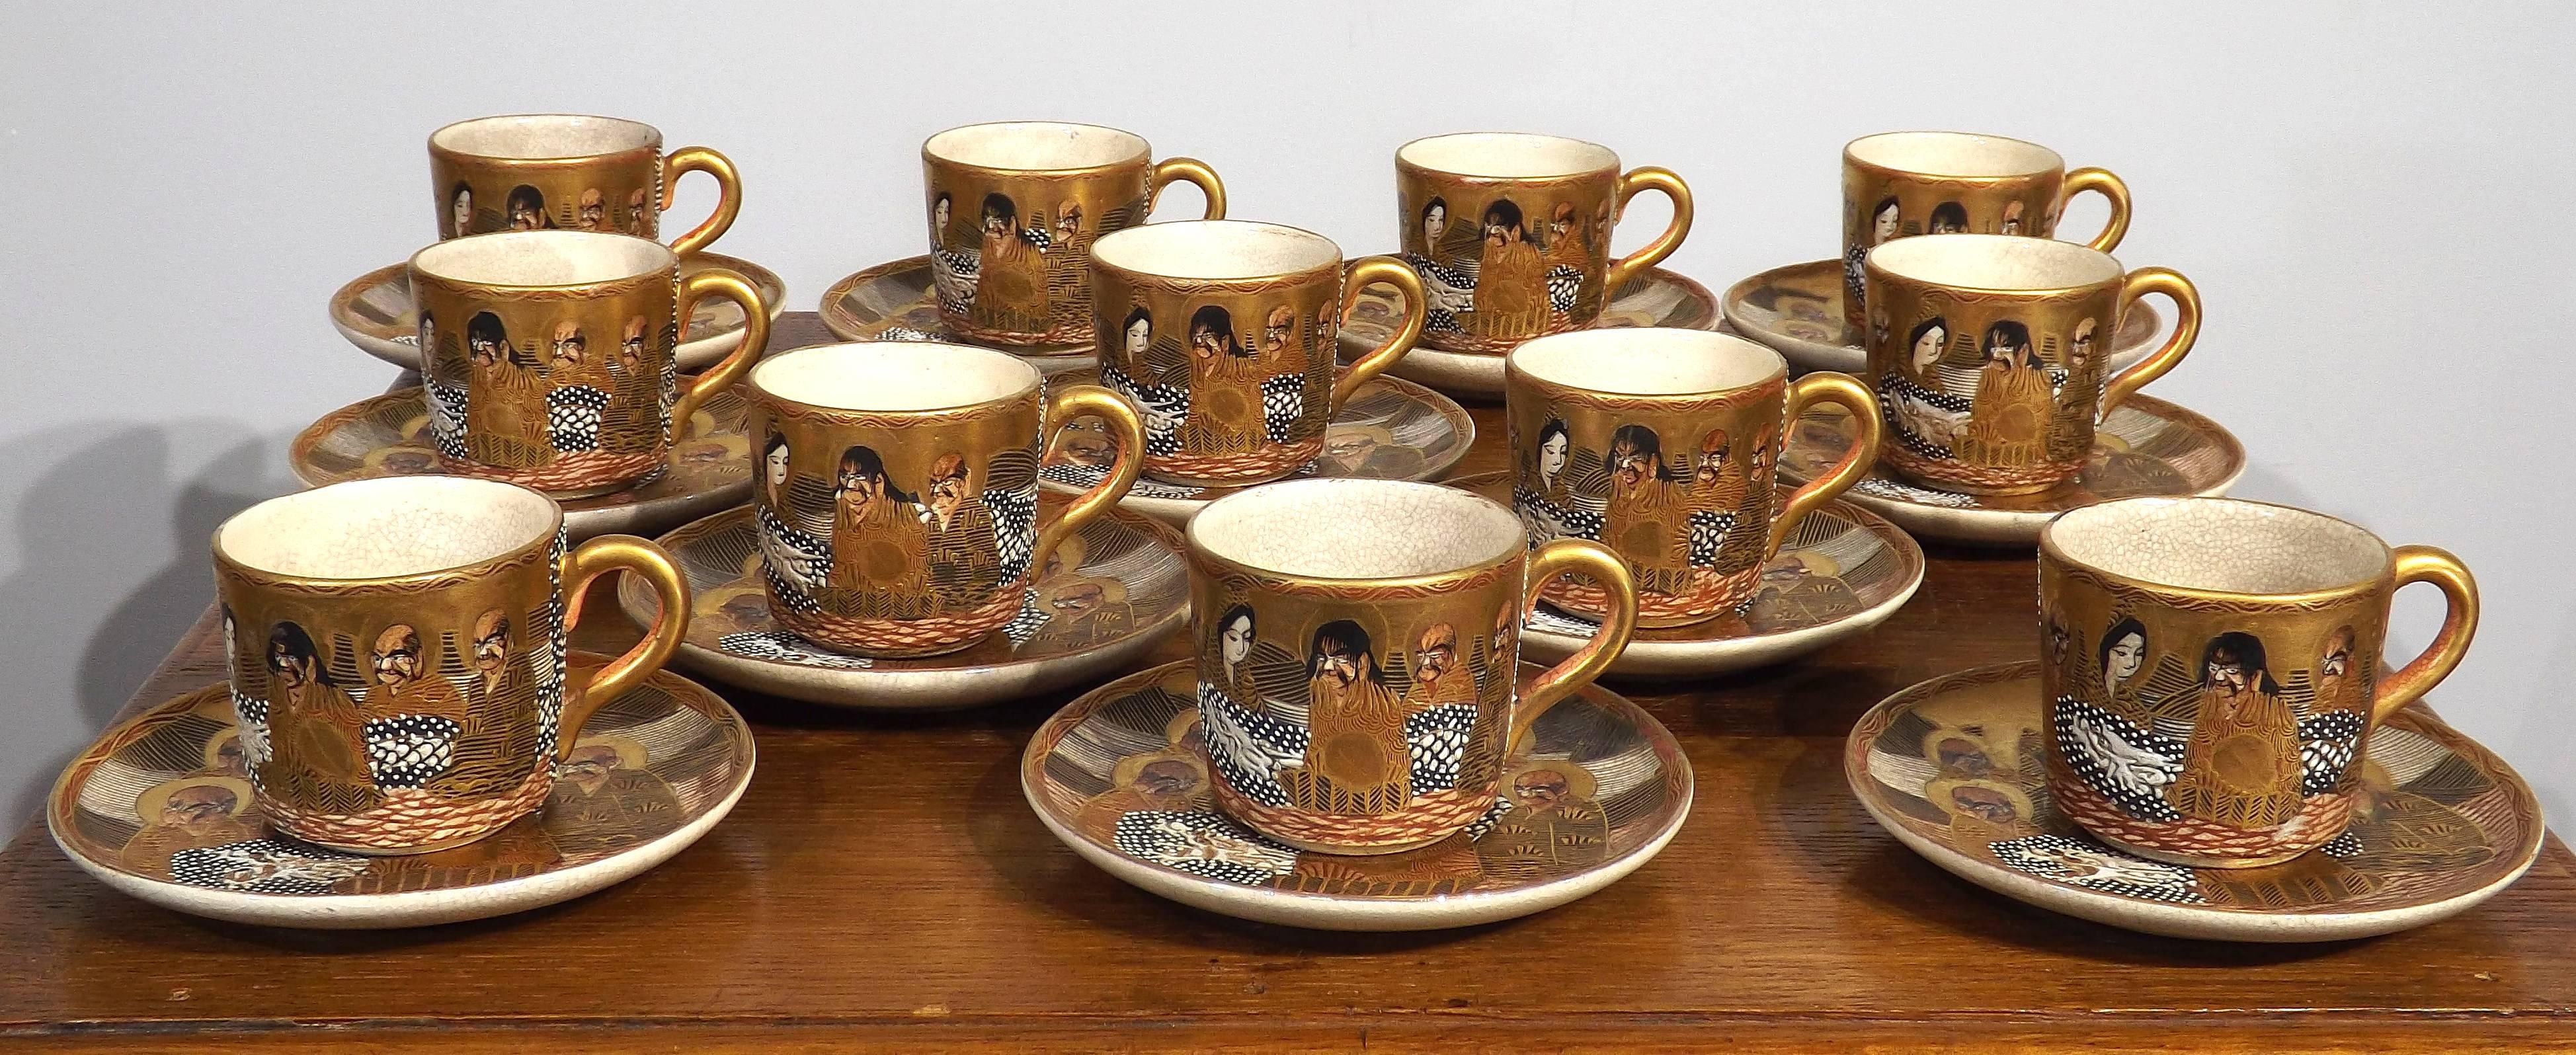 Fine set of highly decorated Satsuma cups and saucers in their original silk lined wooden presentation case. All 24 pieces are undamaged. Box shows signs of wear and is missing it's latch. Silk strap to hold box open is absent.